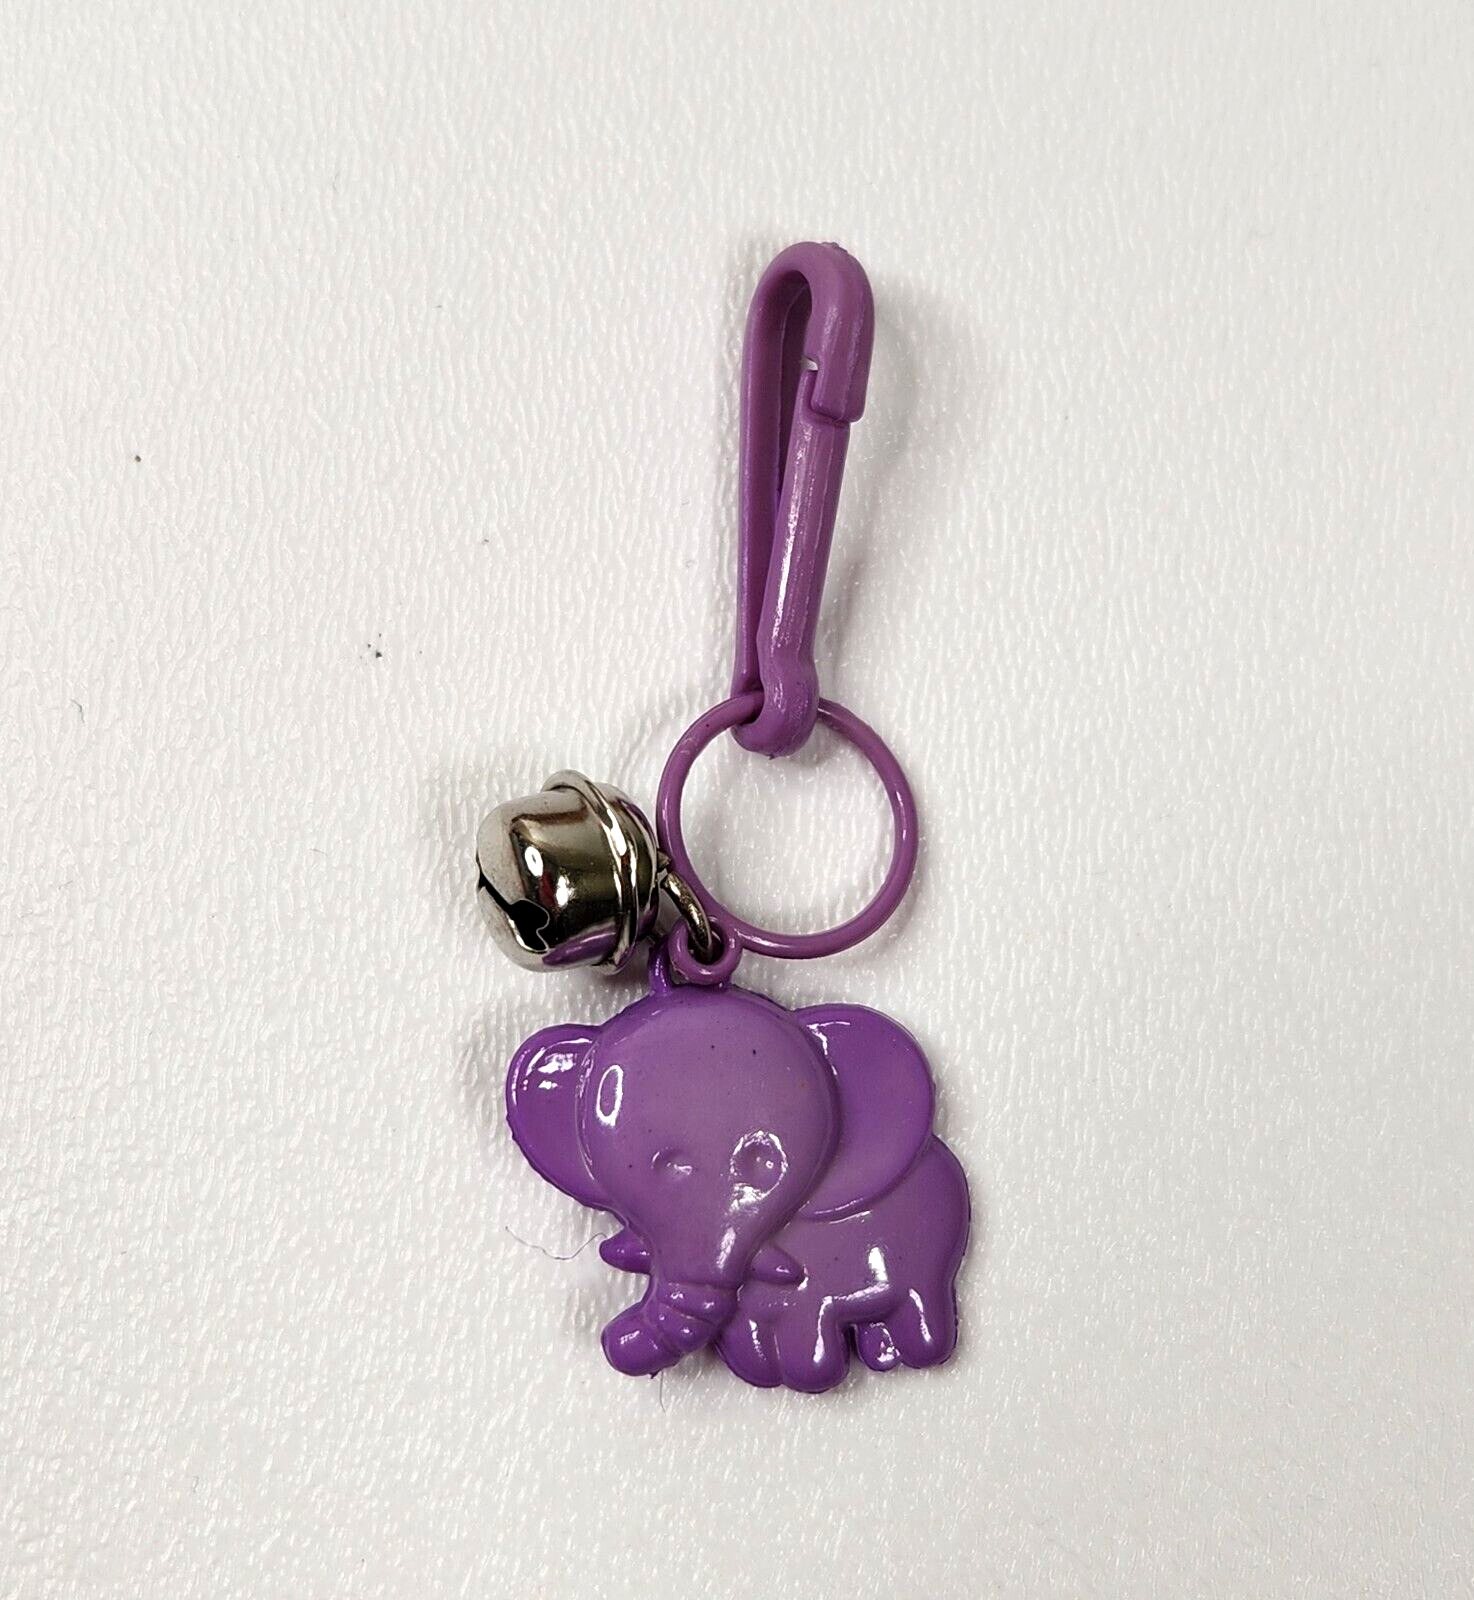 Vintage 1980s Plastic Bell Charm Elephant For 80s Necklace